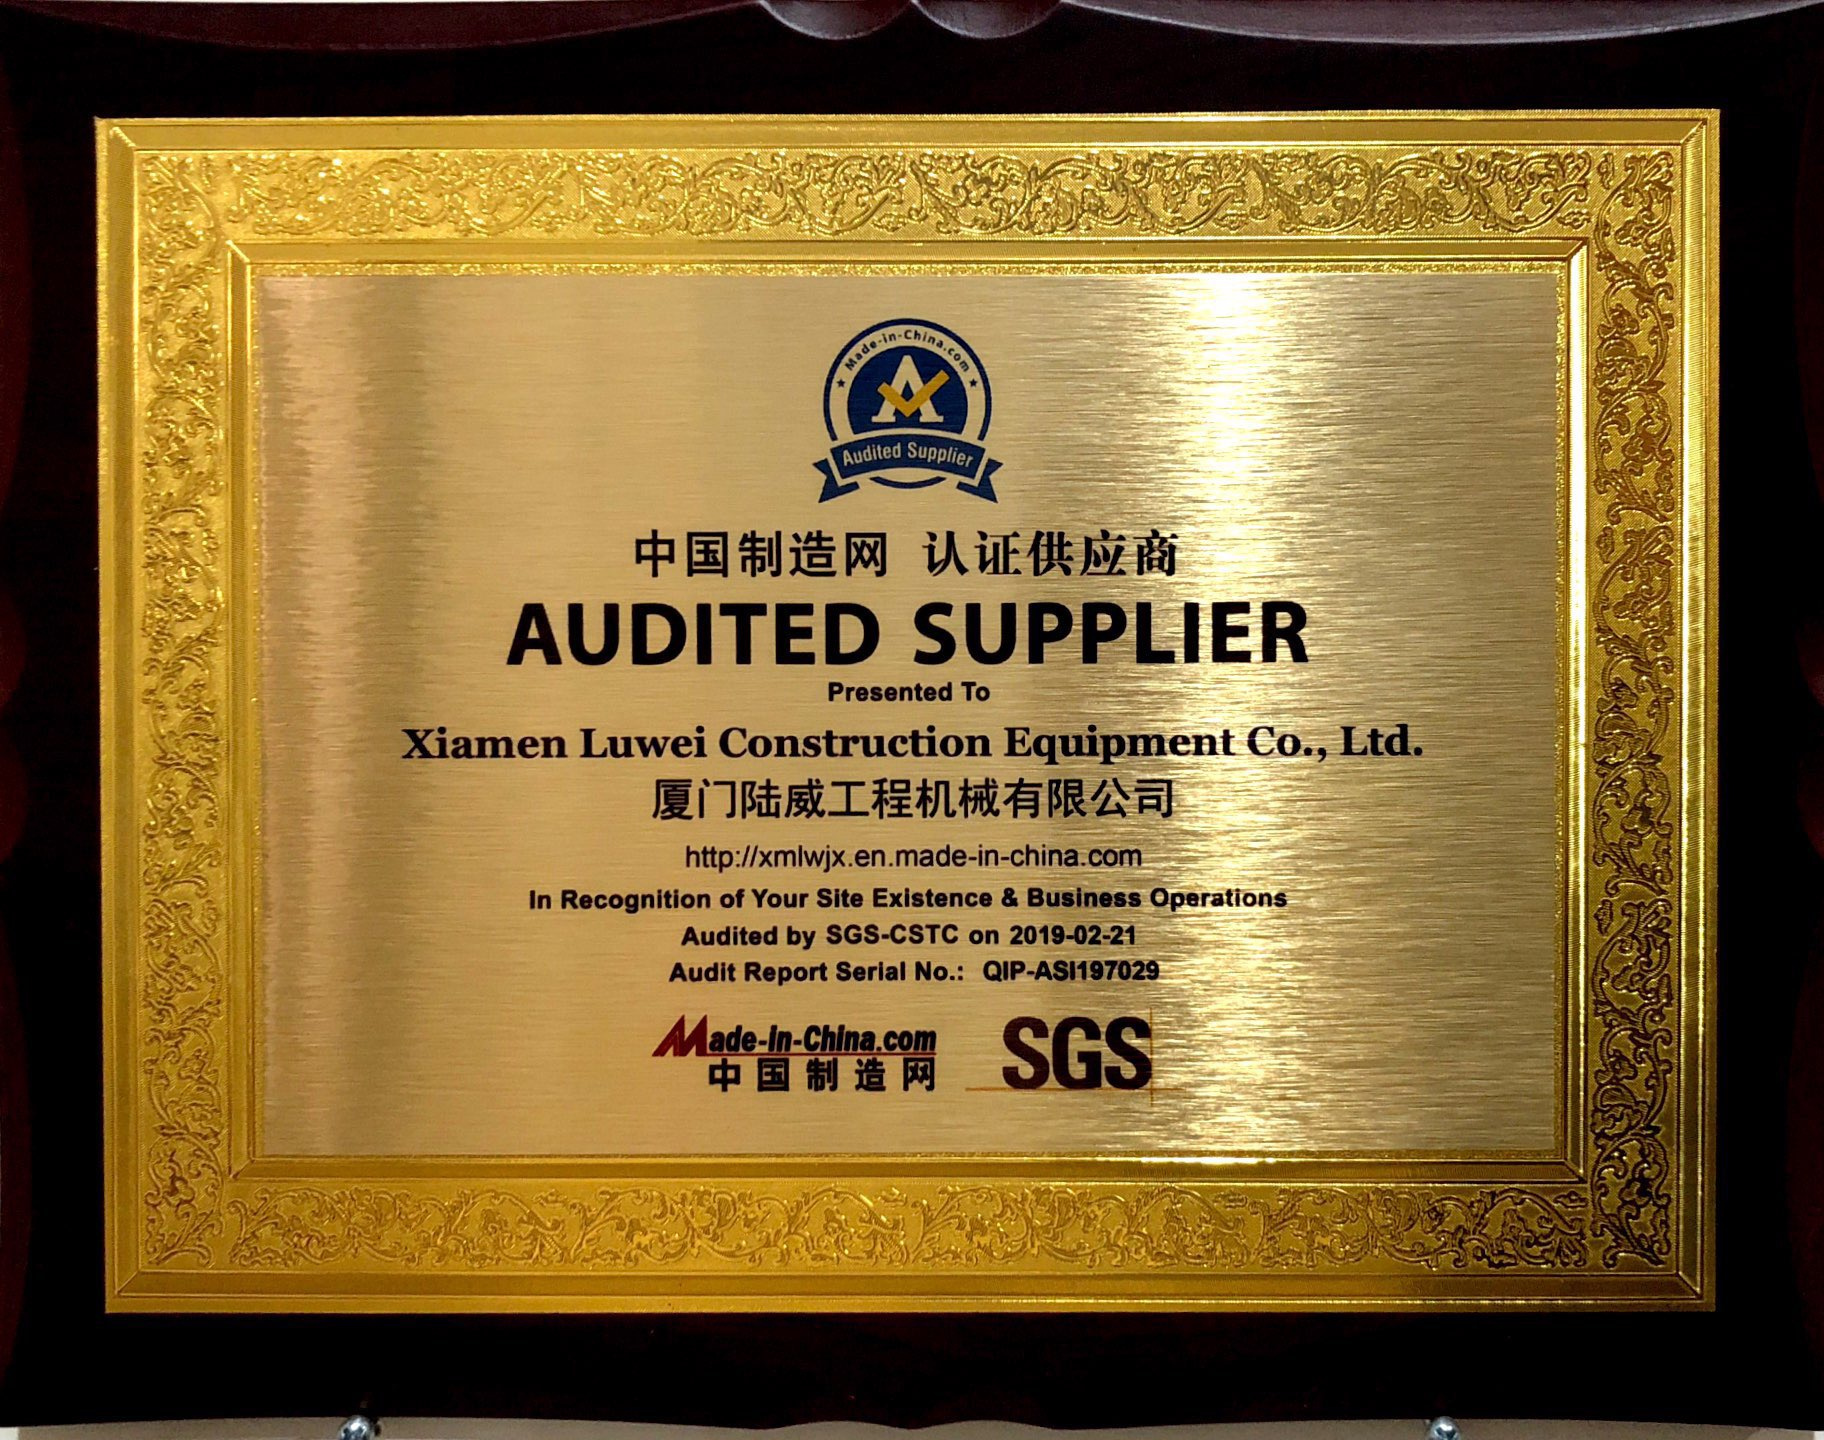 2019 audited suppliers by MIC